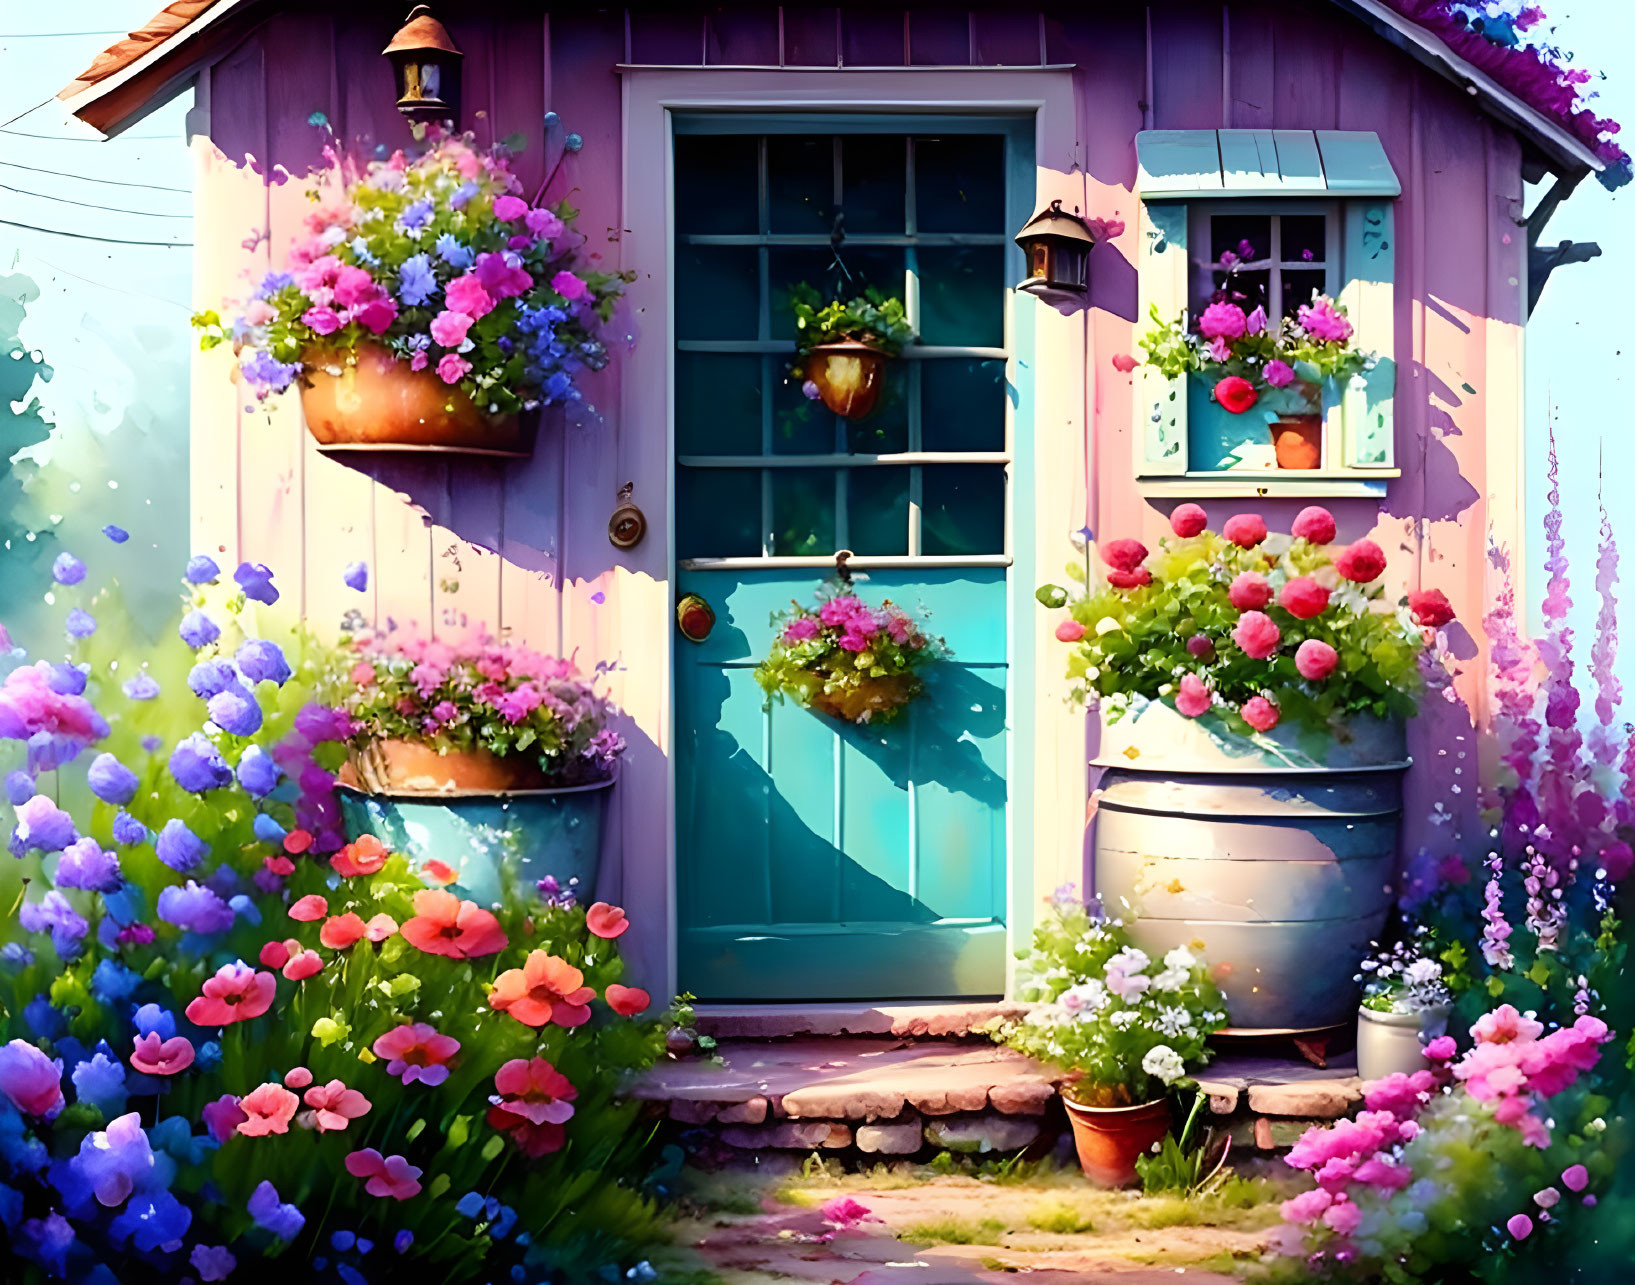 Charming cottage door with vibrant flowers and cobblestone path